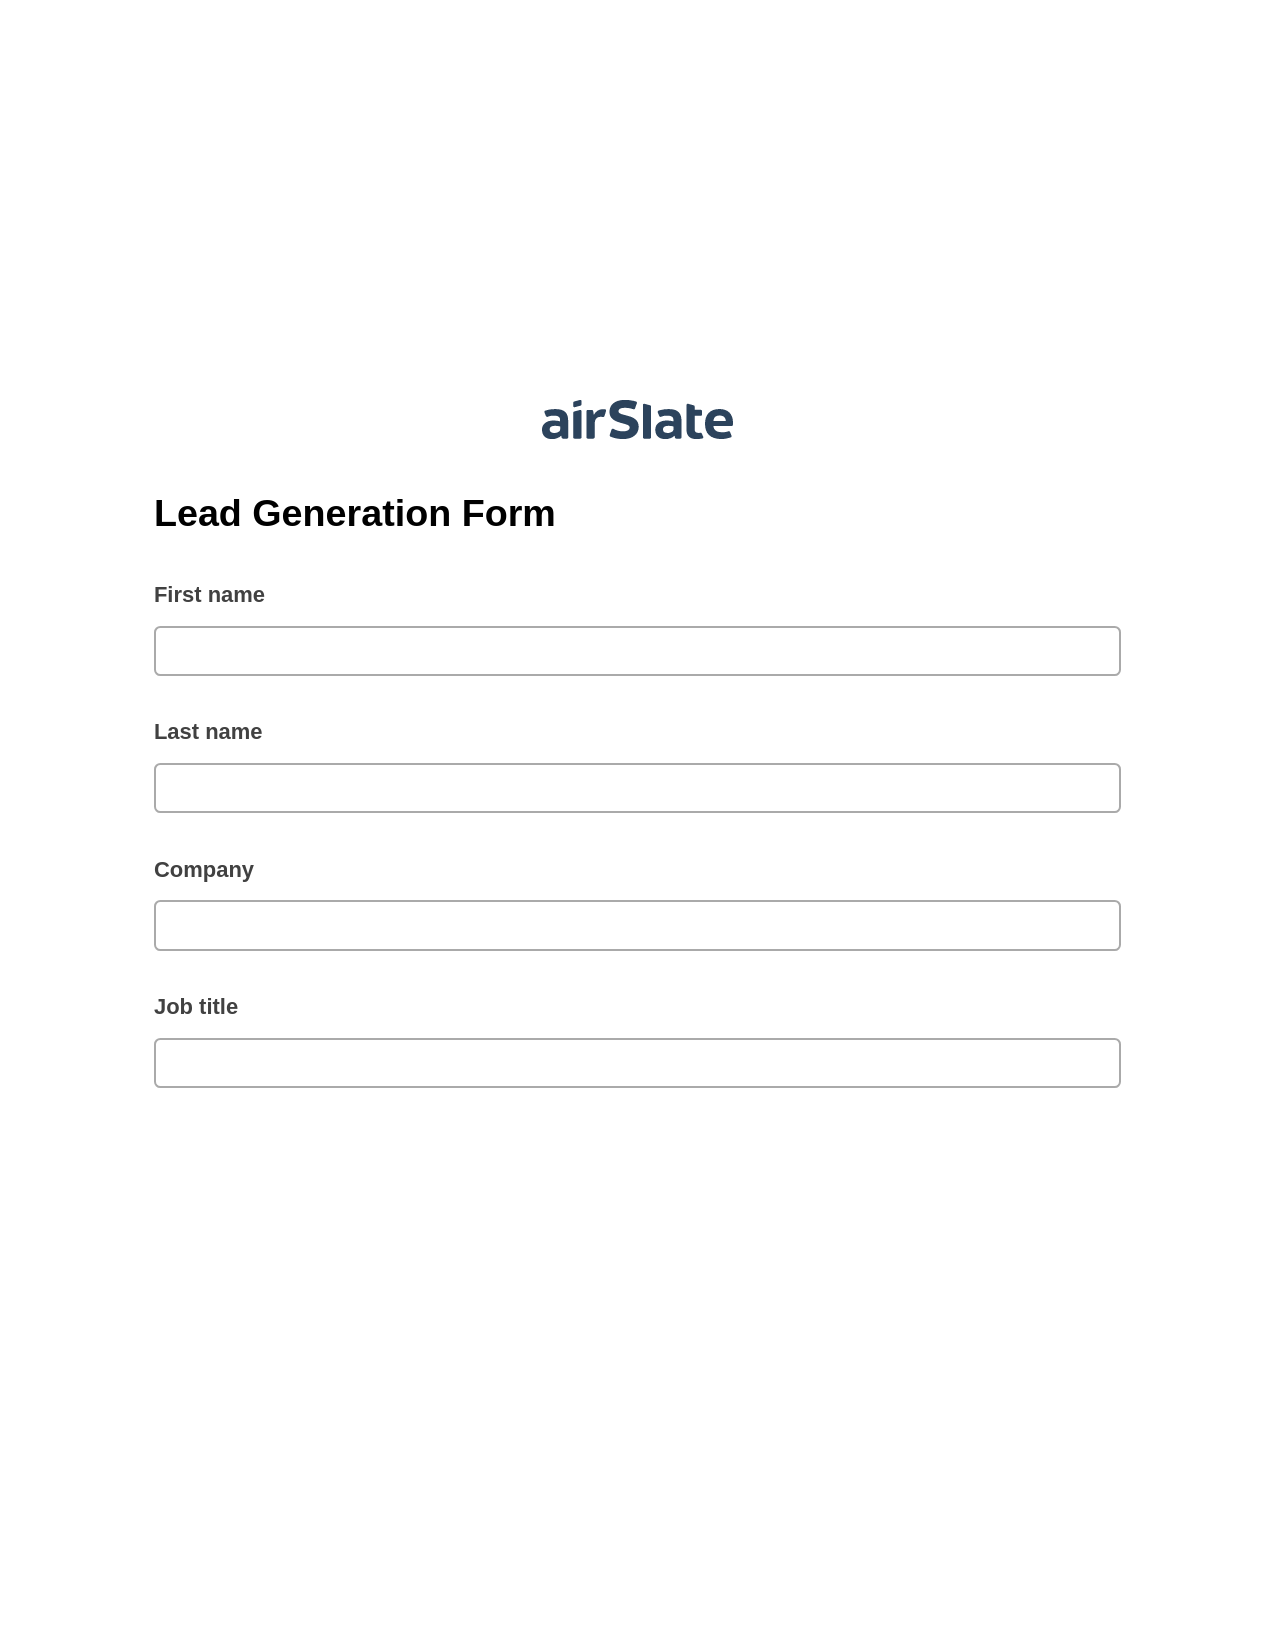 Lead Generation Form Pre-fill from another Slate Bot, System Bot - Create a Slate in another Flow, Archive to Box Bot